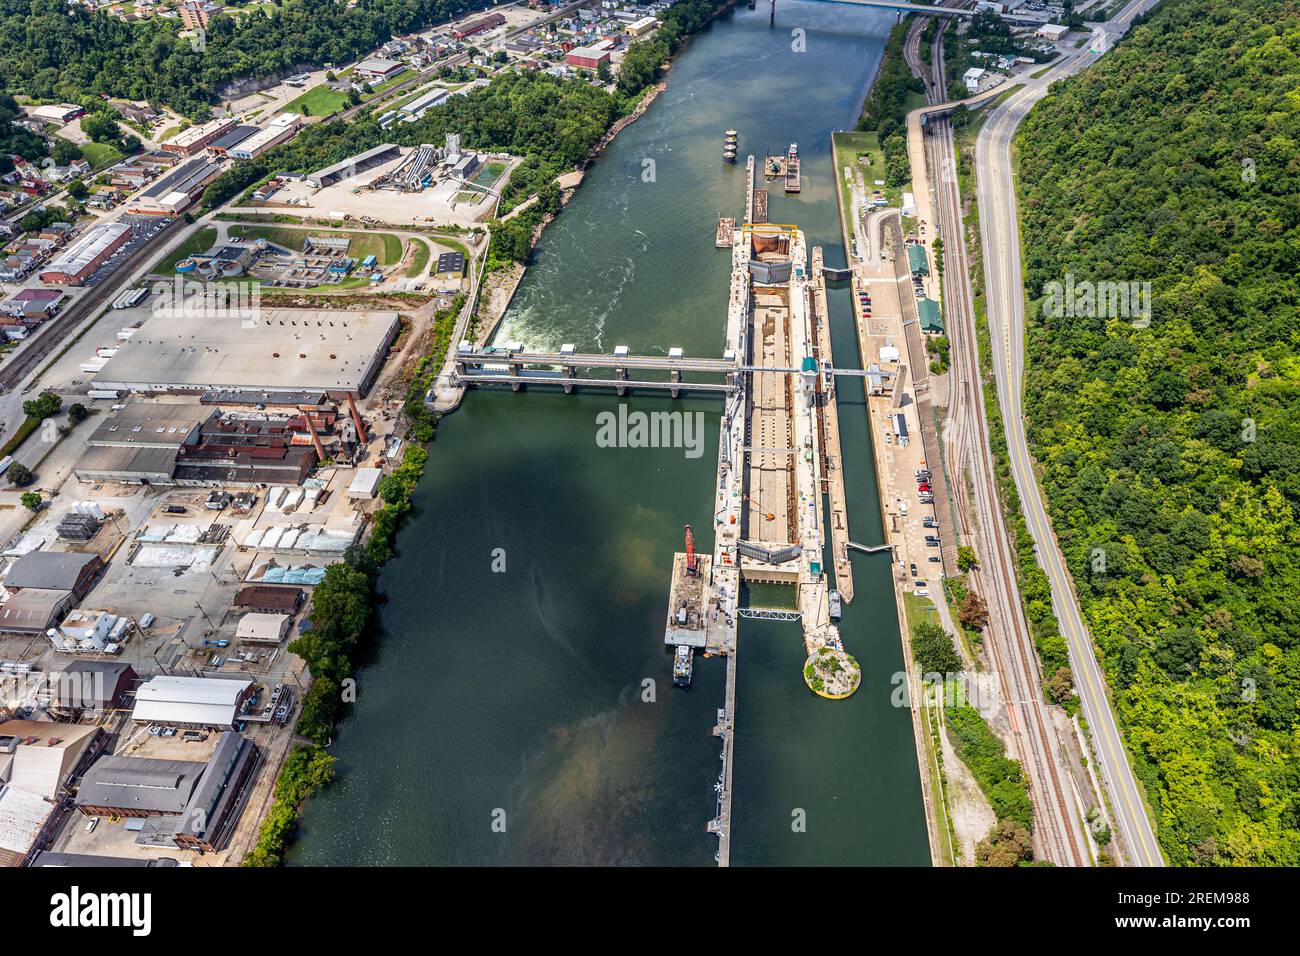 The photo above is an aerial view of Monongahela River Locks and Dam 4 near Charleroi, Pennsylvania, July 21, 2023. The facility is one of nine navigation structures on the Monongahela River that provide navigation from Fairmont, West Virginia, to downtown Pittsburgh. The U.S. Army Corps of Engineers started constructing the lock at Charleroi in 1931 and finished in 1932. The project became operational Aug. 14, 1932. The most recent construction at the facility began in 1994 to replace the main chamber with a new lock measuring 720 feet long and 84 feet wide. Charleroi is located at river mile Stock Photo